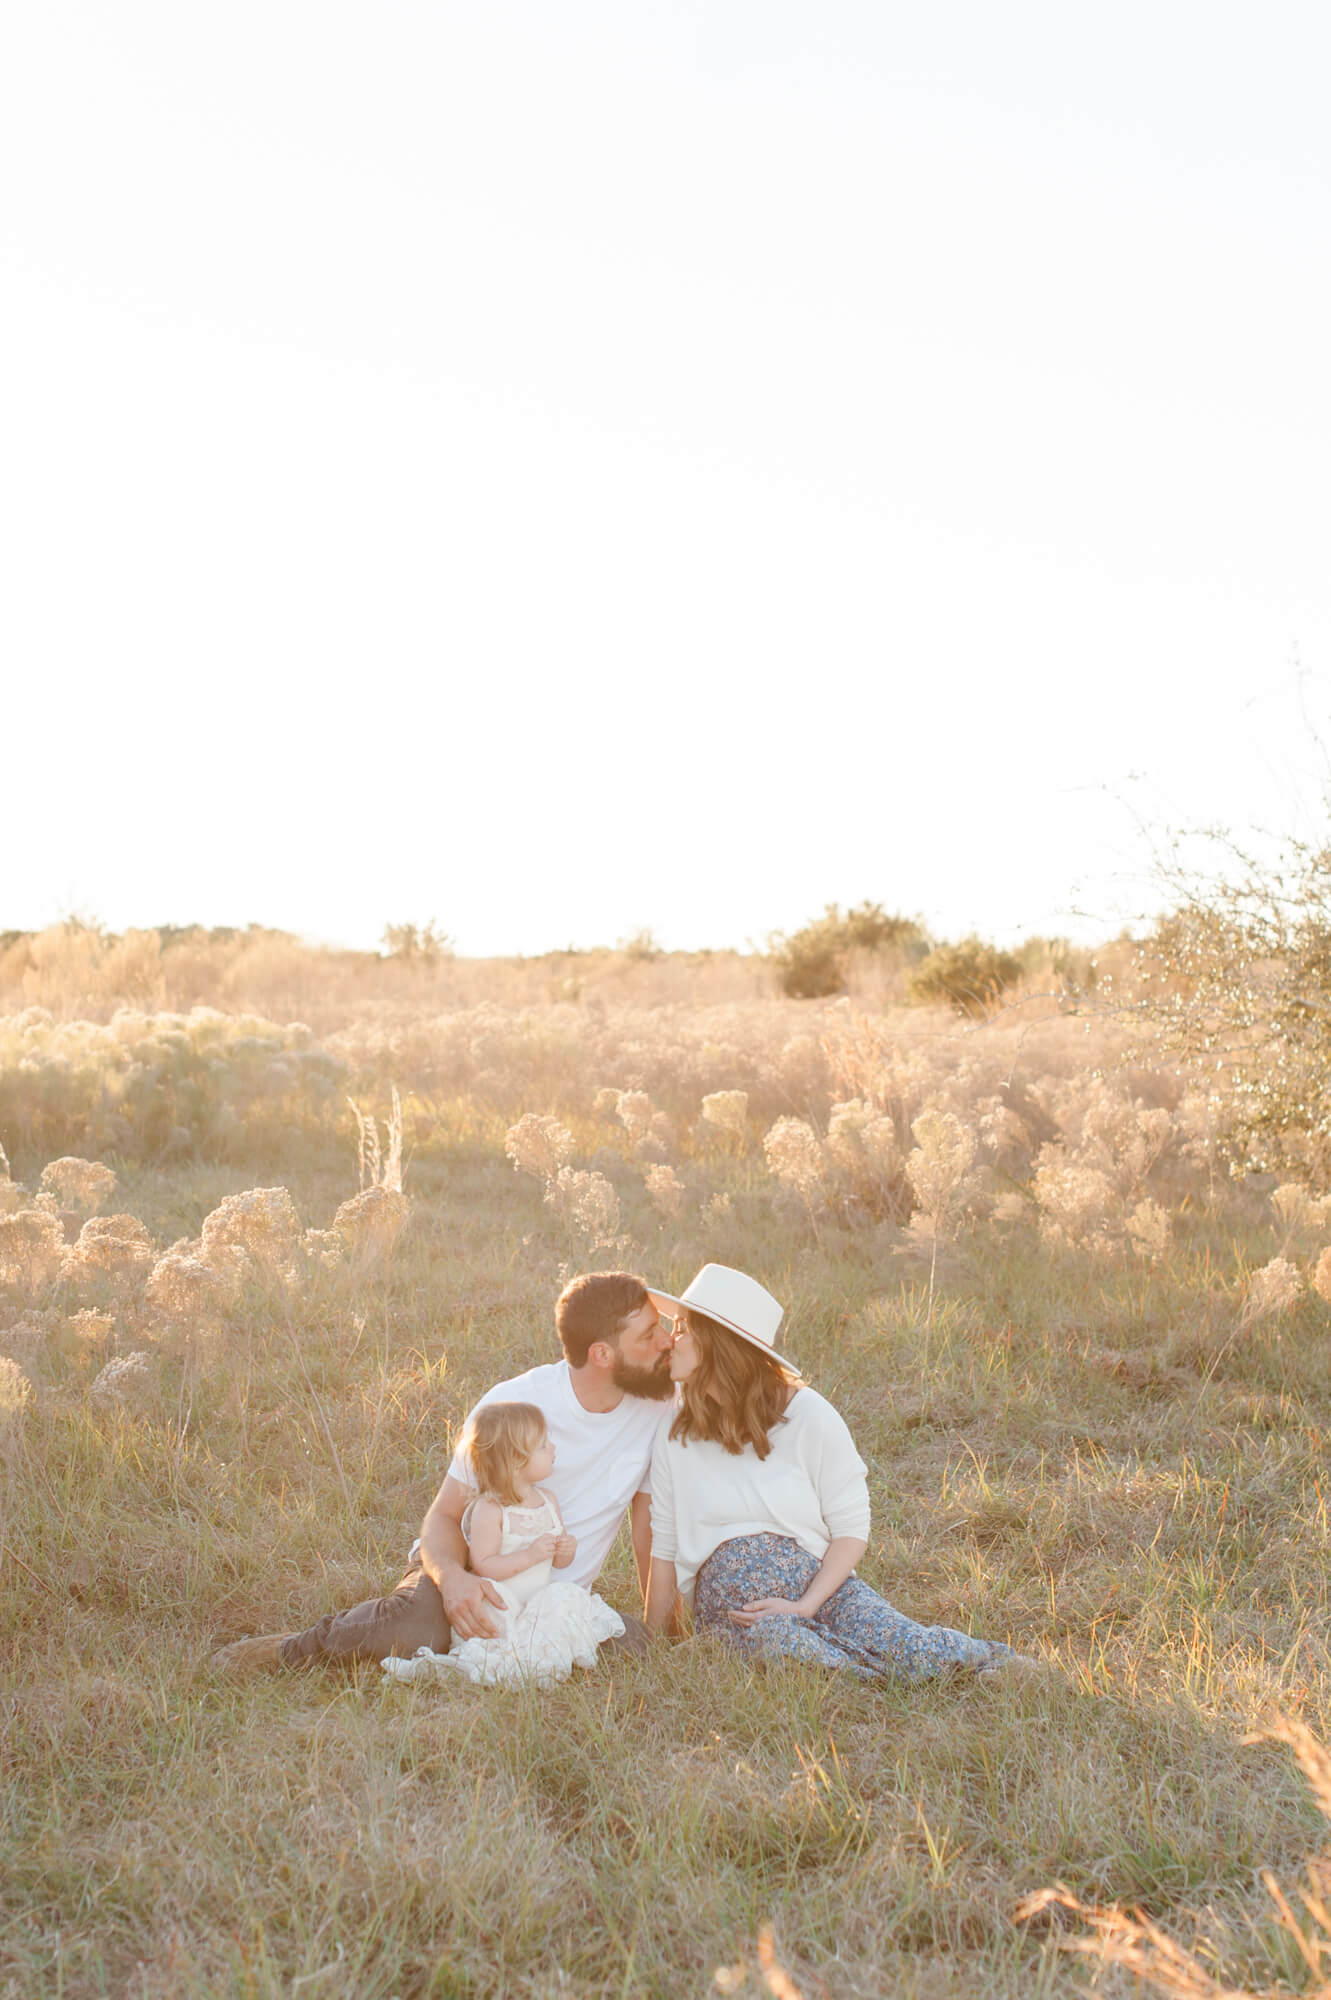 Expecting parents share a kiss while sitting in a tall grass field with their young toddler daughter at sunset.